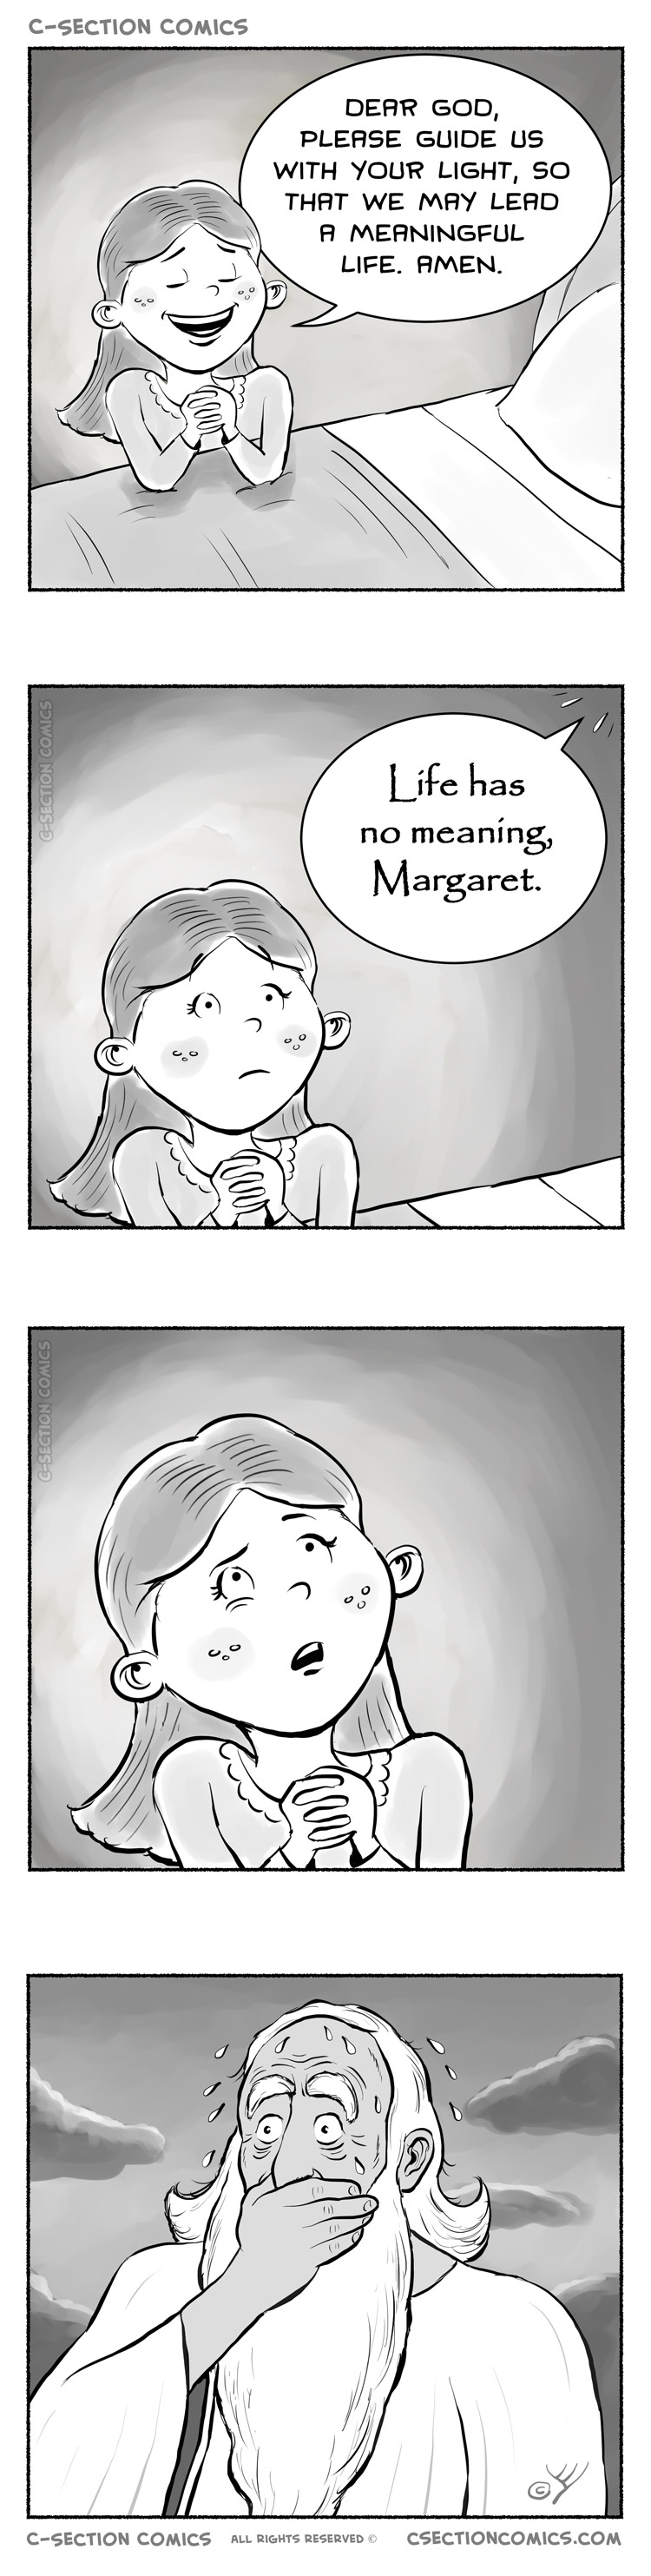 Are you there God? It's me, Margaret - C-Section Comics